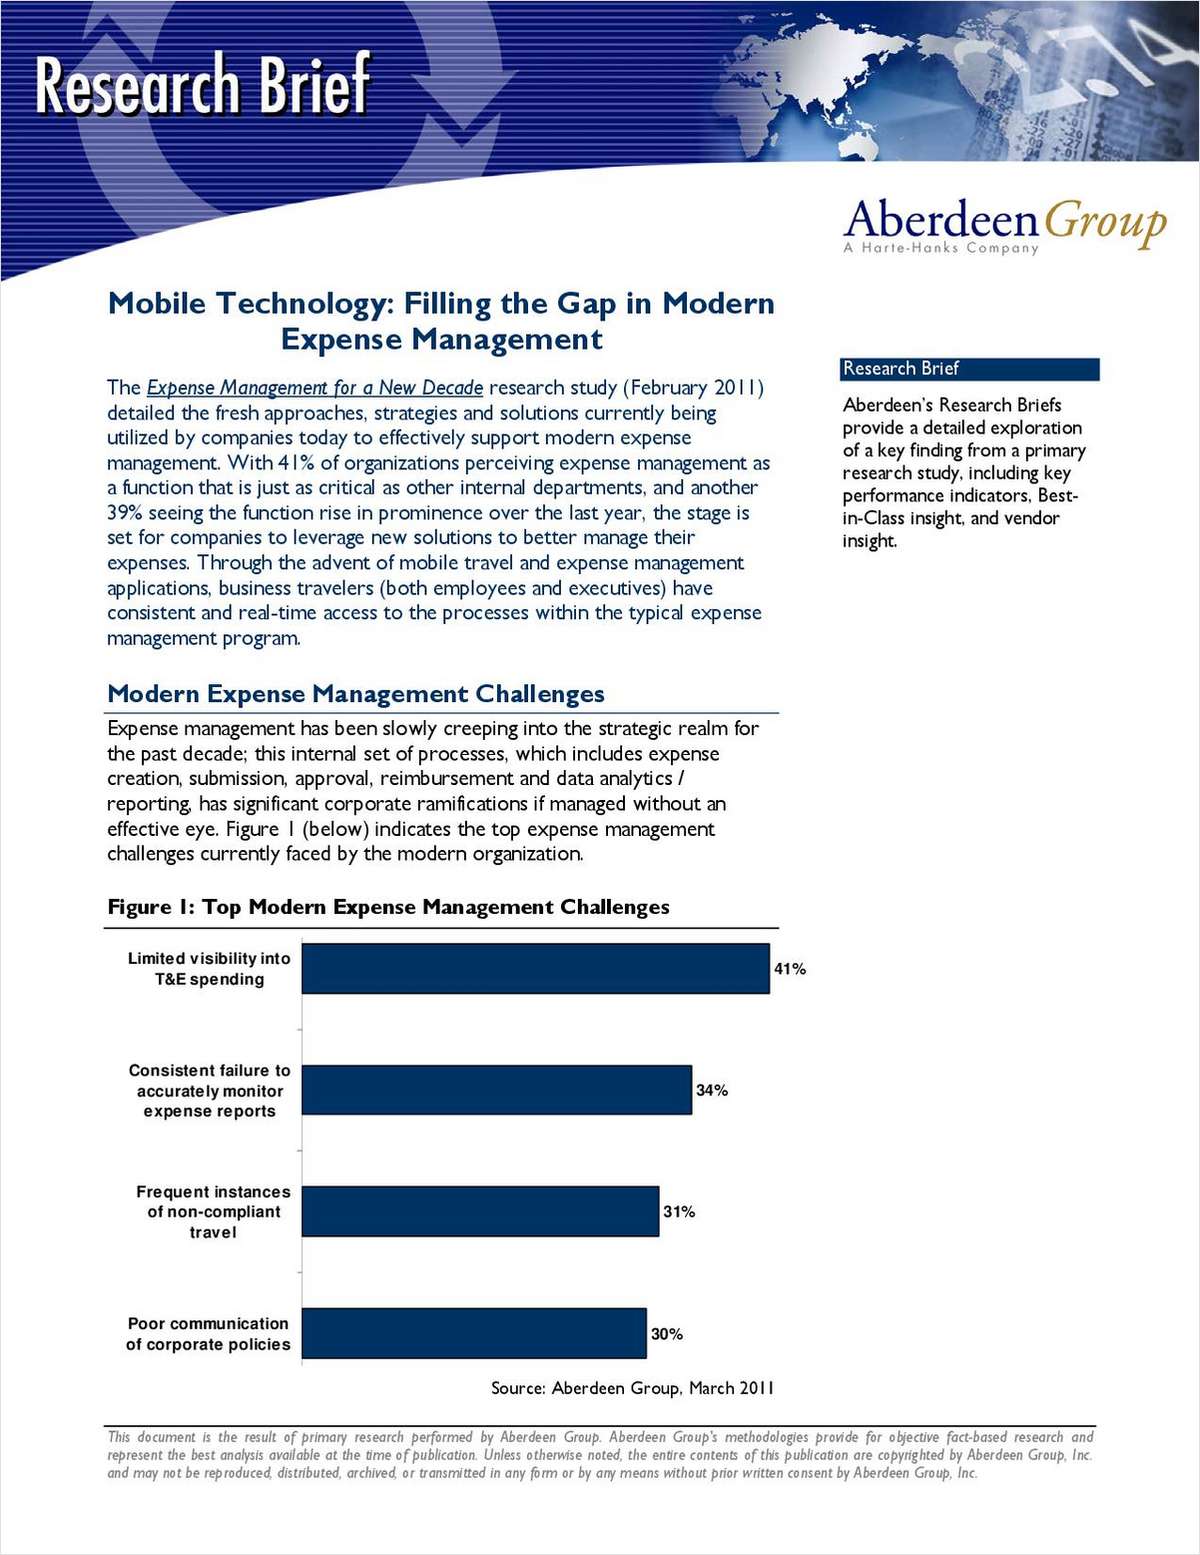 Mobile Technology: Filling the Gap in Modern Expense Management